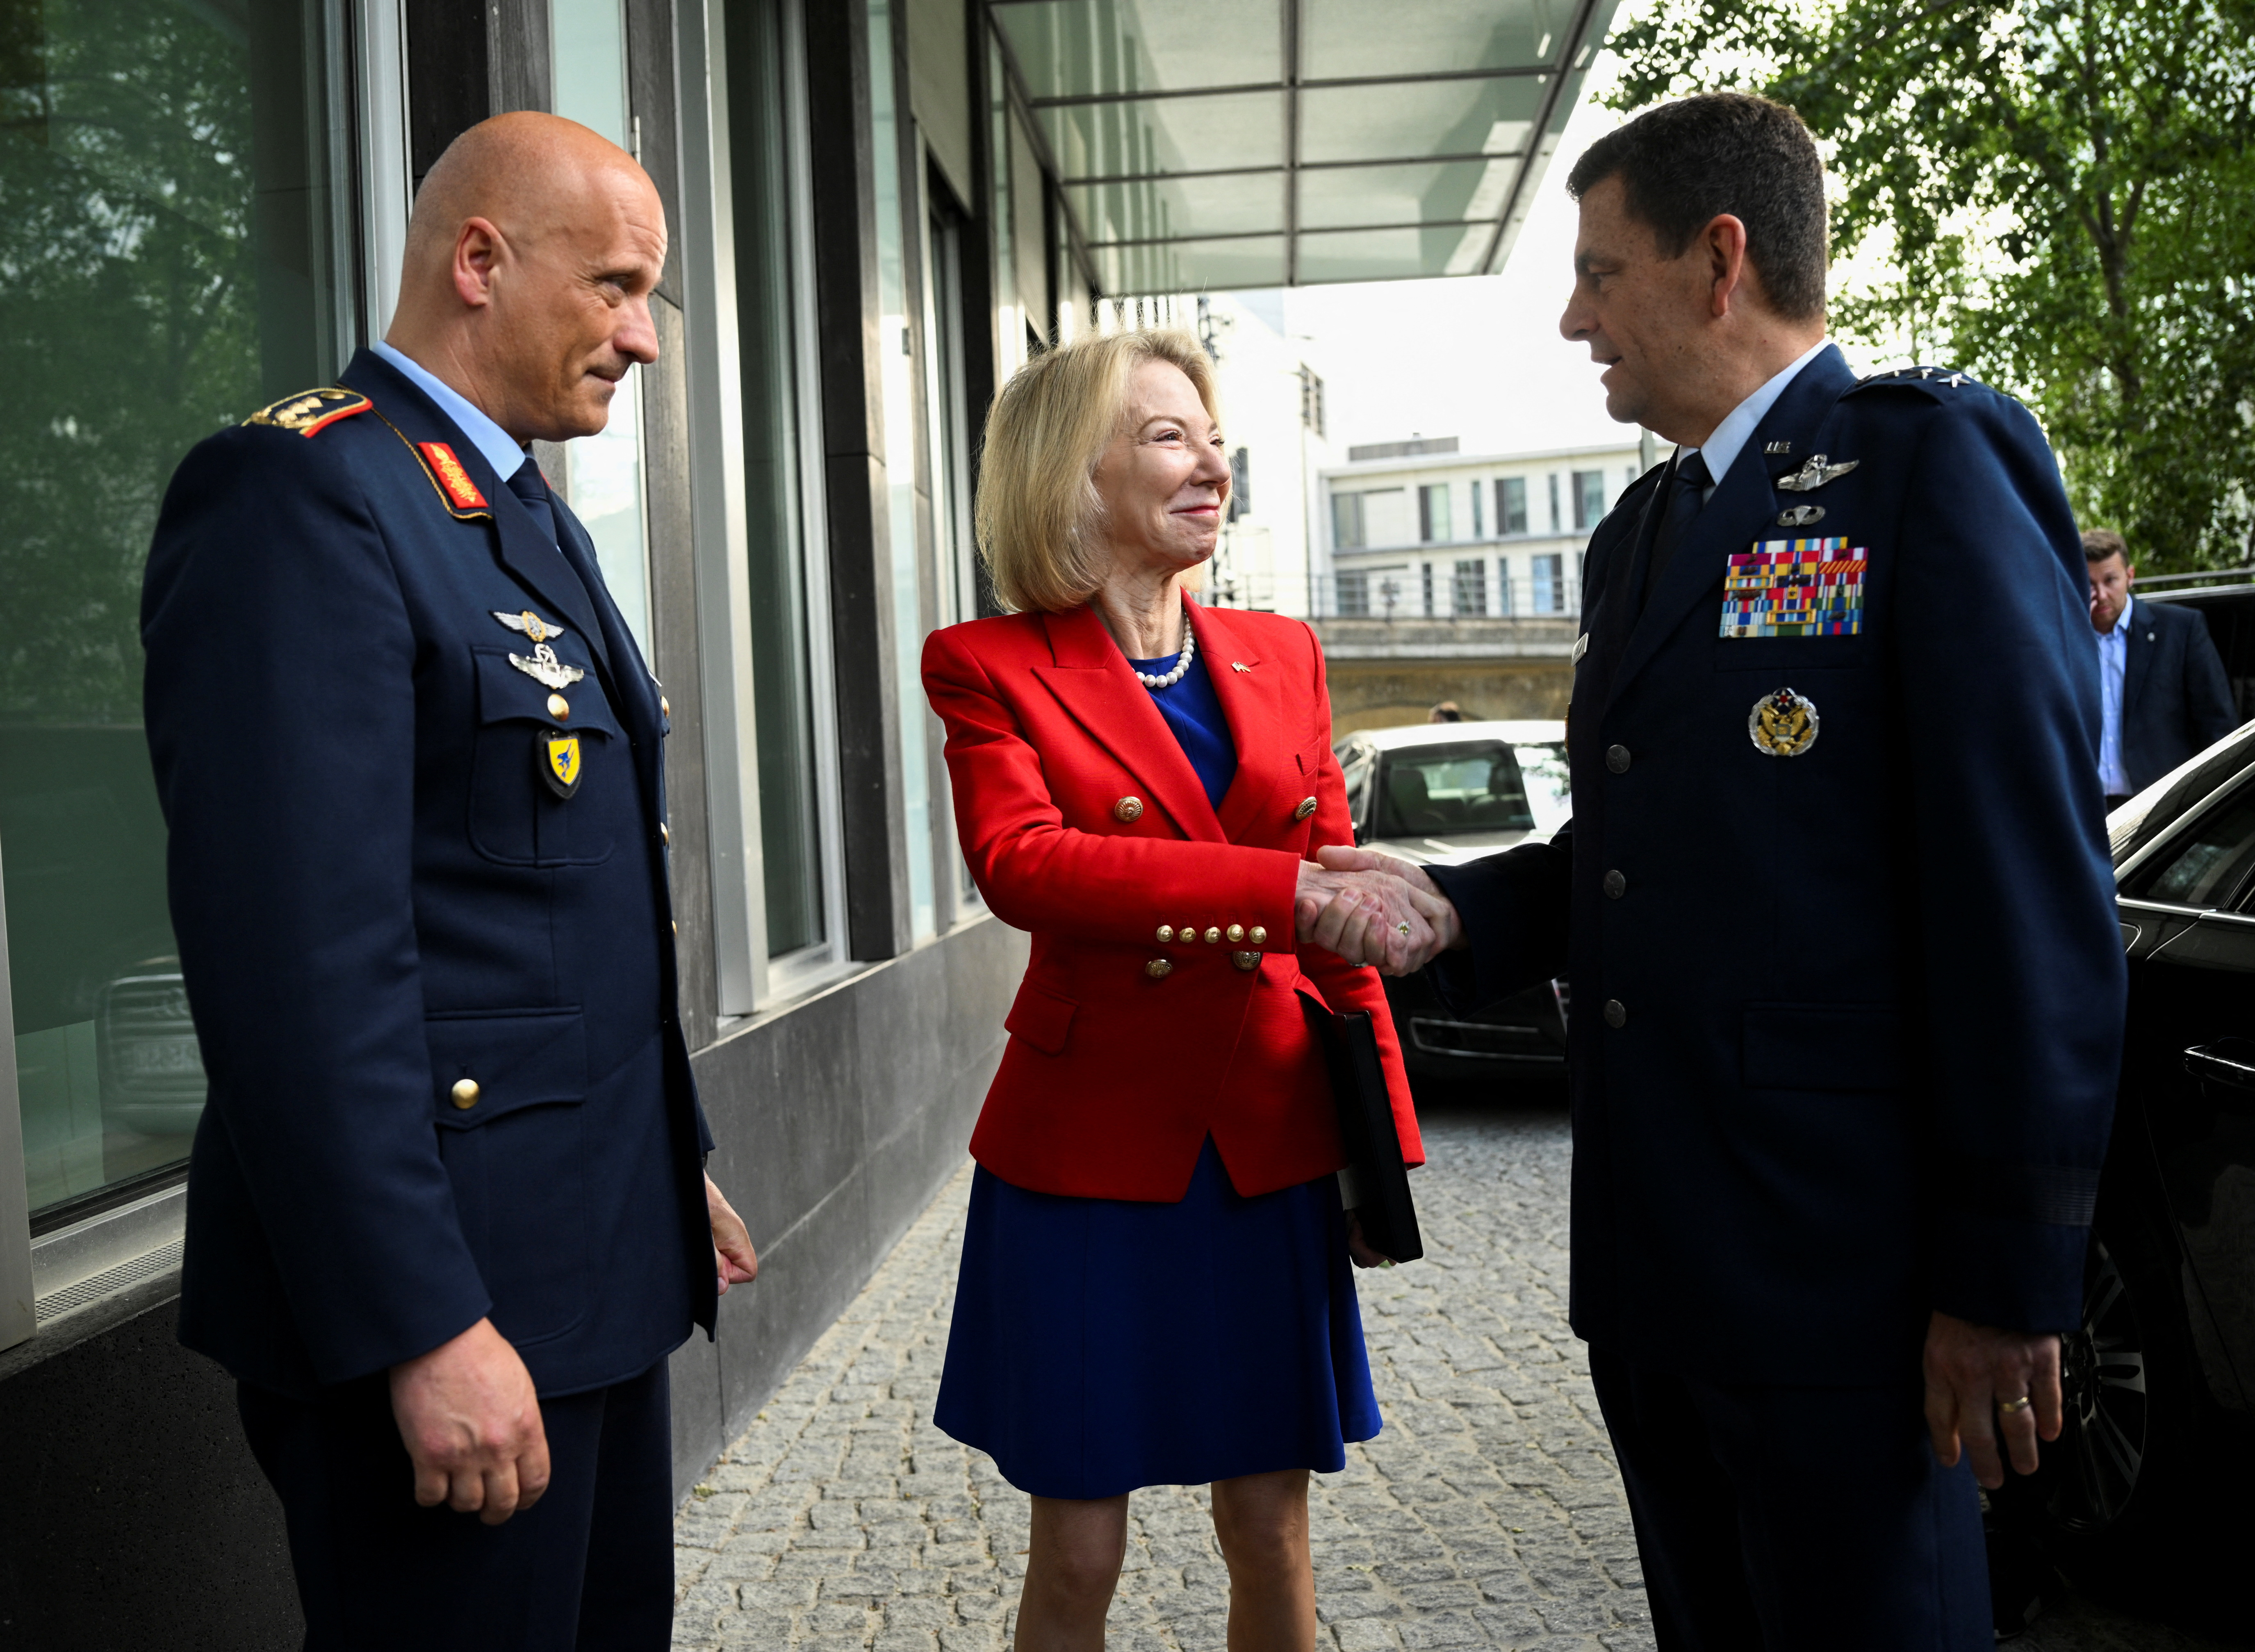 United States Ambassador to Germany Amy Gutmann, Inspector of the German Air Force, Lieutenant General Ingo Gerhartz and U.S. Air National Guard Director, Lieutenant General Michael A. Loh talk on the sidelines of a press conference about the Air Defender 23, the largest multinational deployment exercise of air forces in the history of NATO, in Berlin, Germany June 7, 2023. REUTERS/Annegret Hilse